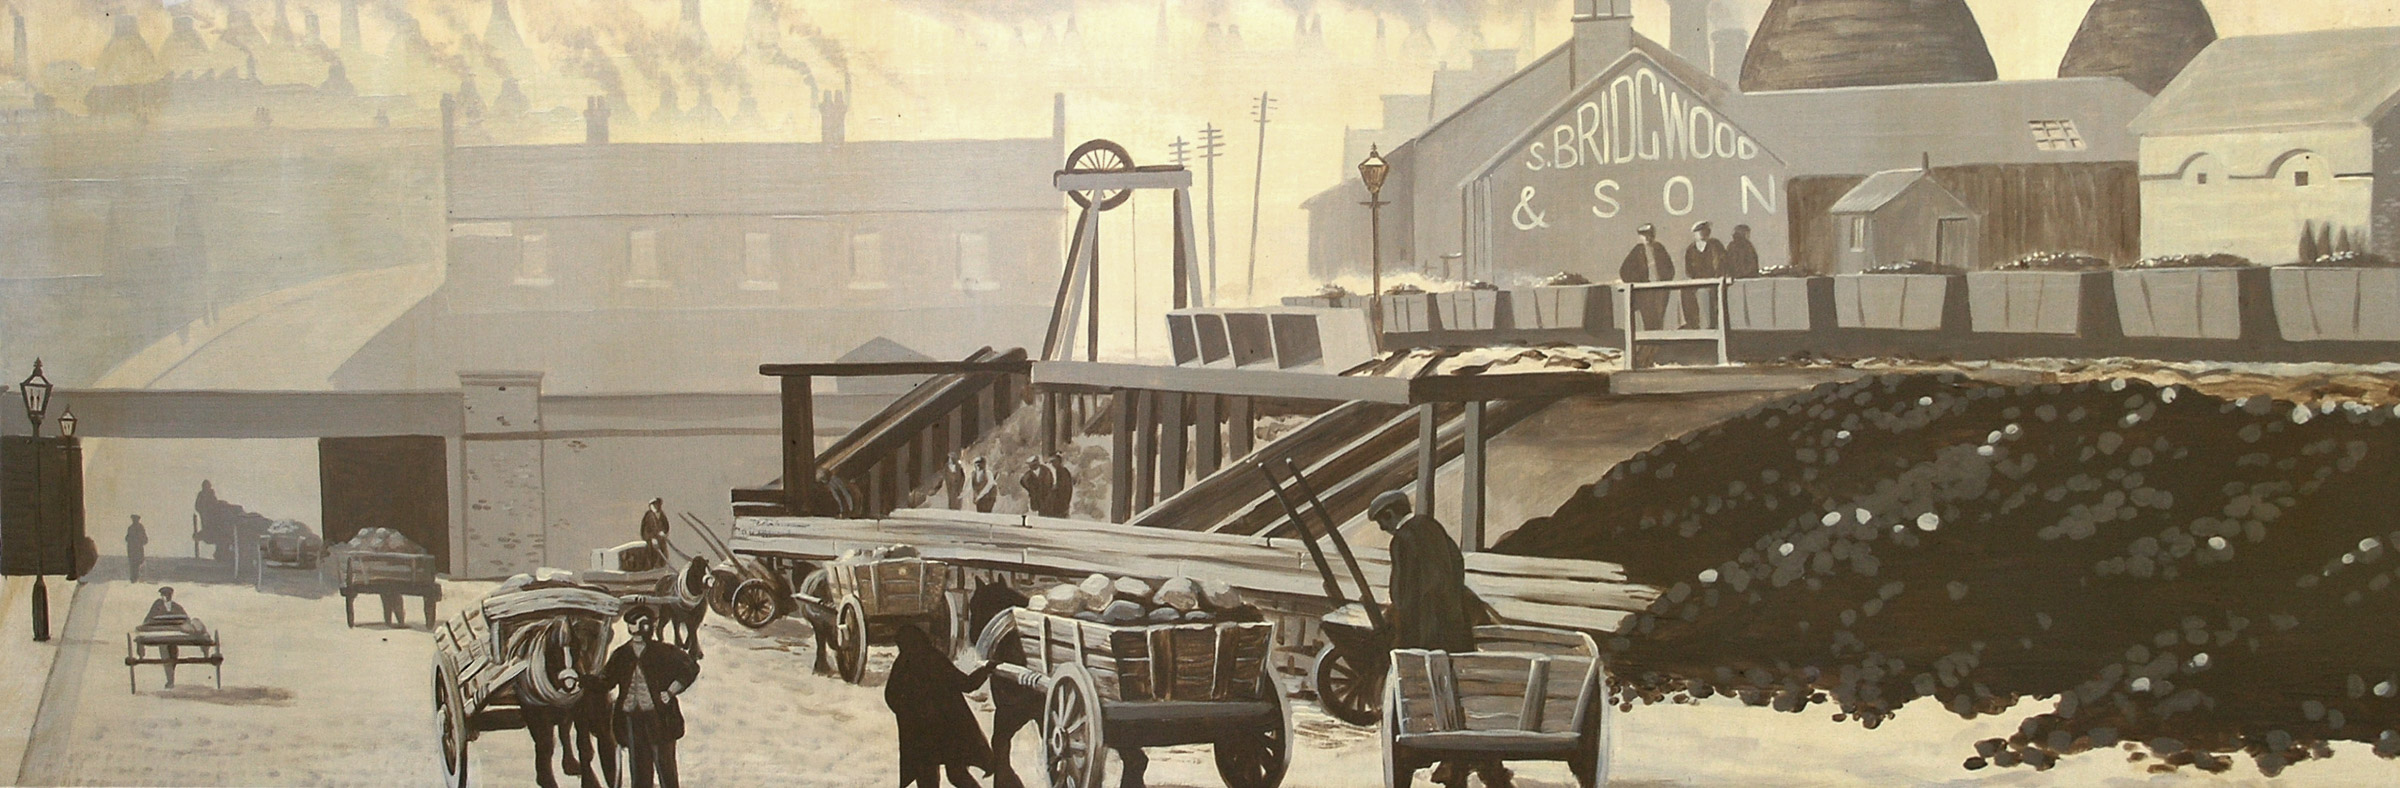 This panel of the mural shows a working street scene in Stoke-on-Trent around the year 1900